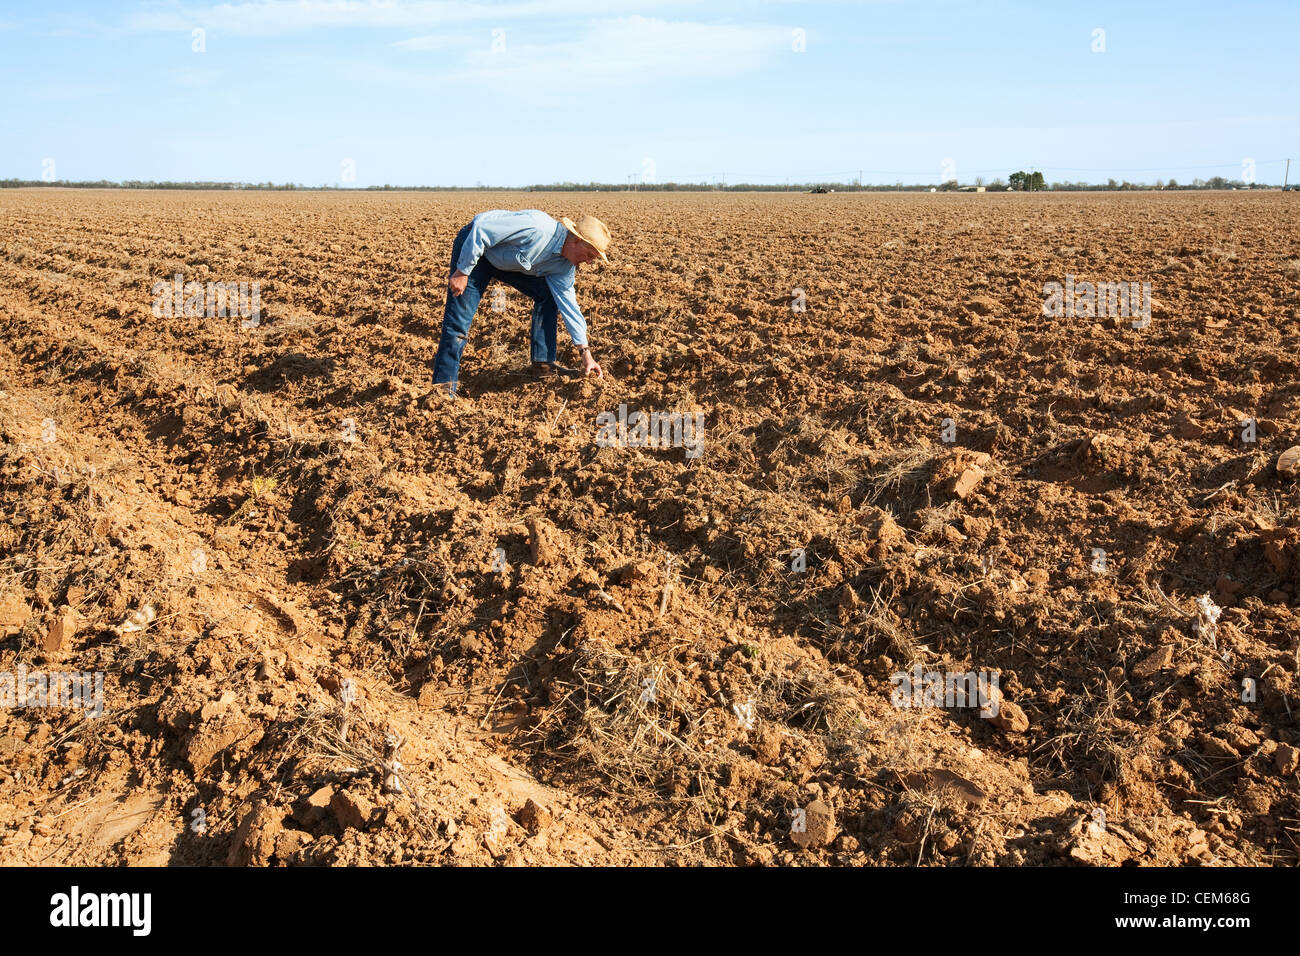 Agriculture - A farmer (grower) examines bedded ground that will be planted to cotton in the coming months / England, Arkansas. Stock Photo